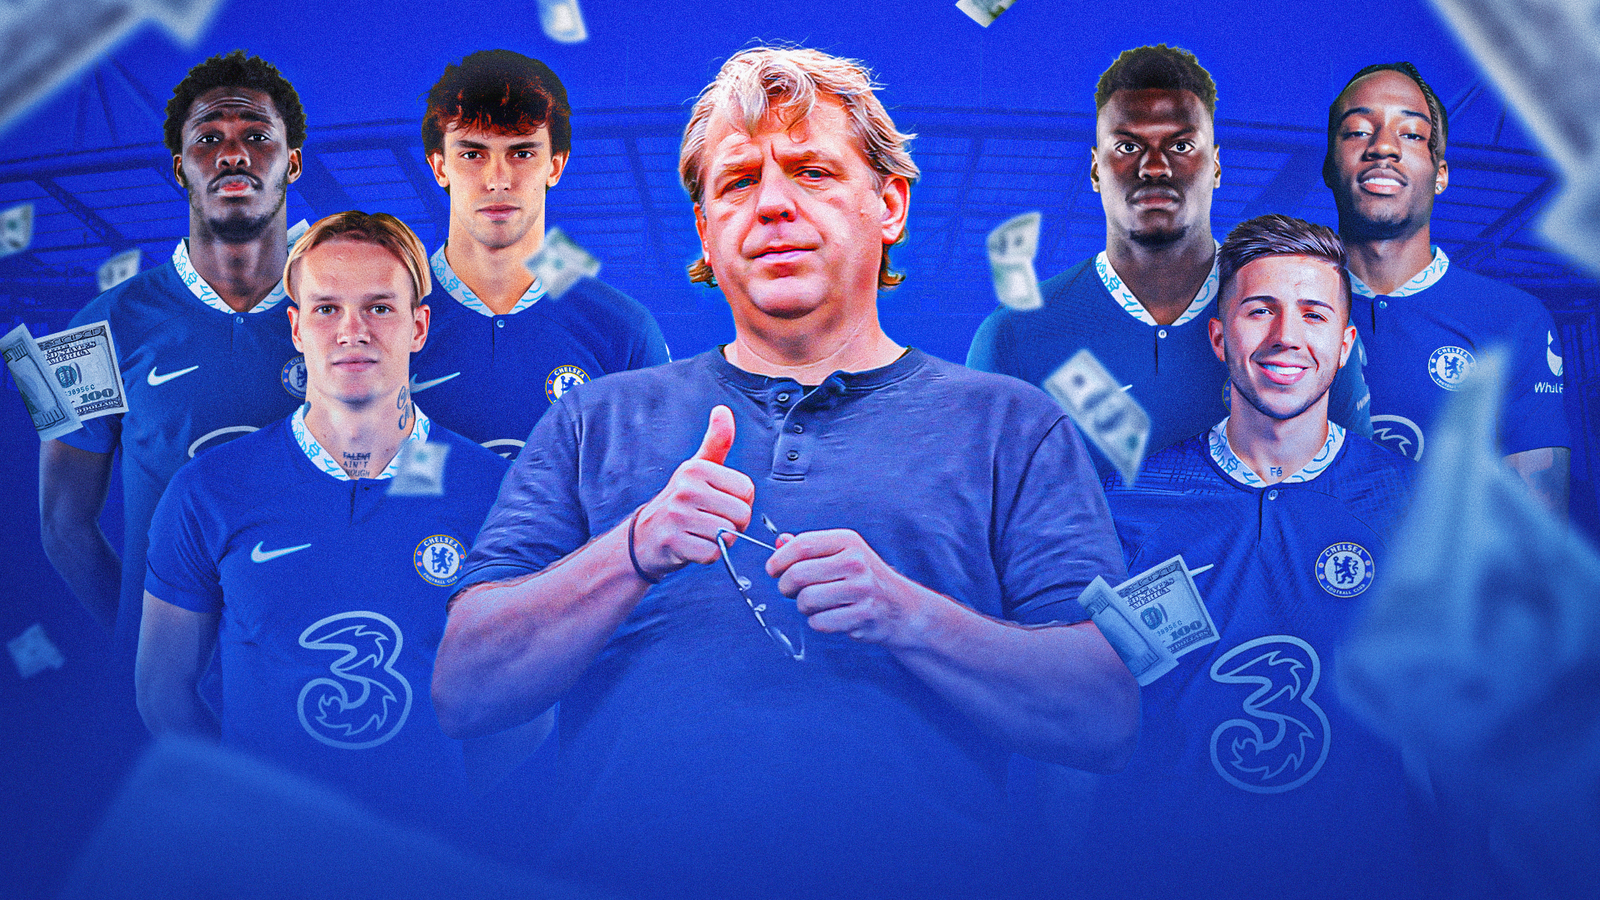 Chelsea's Strategic Moves: A Deep Dive into the Latest Transfer News and Managerial Insights